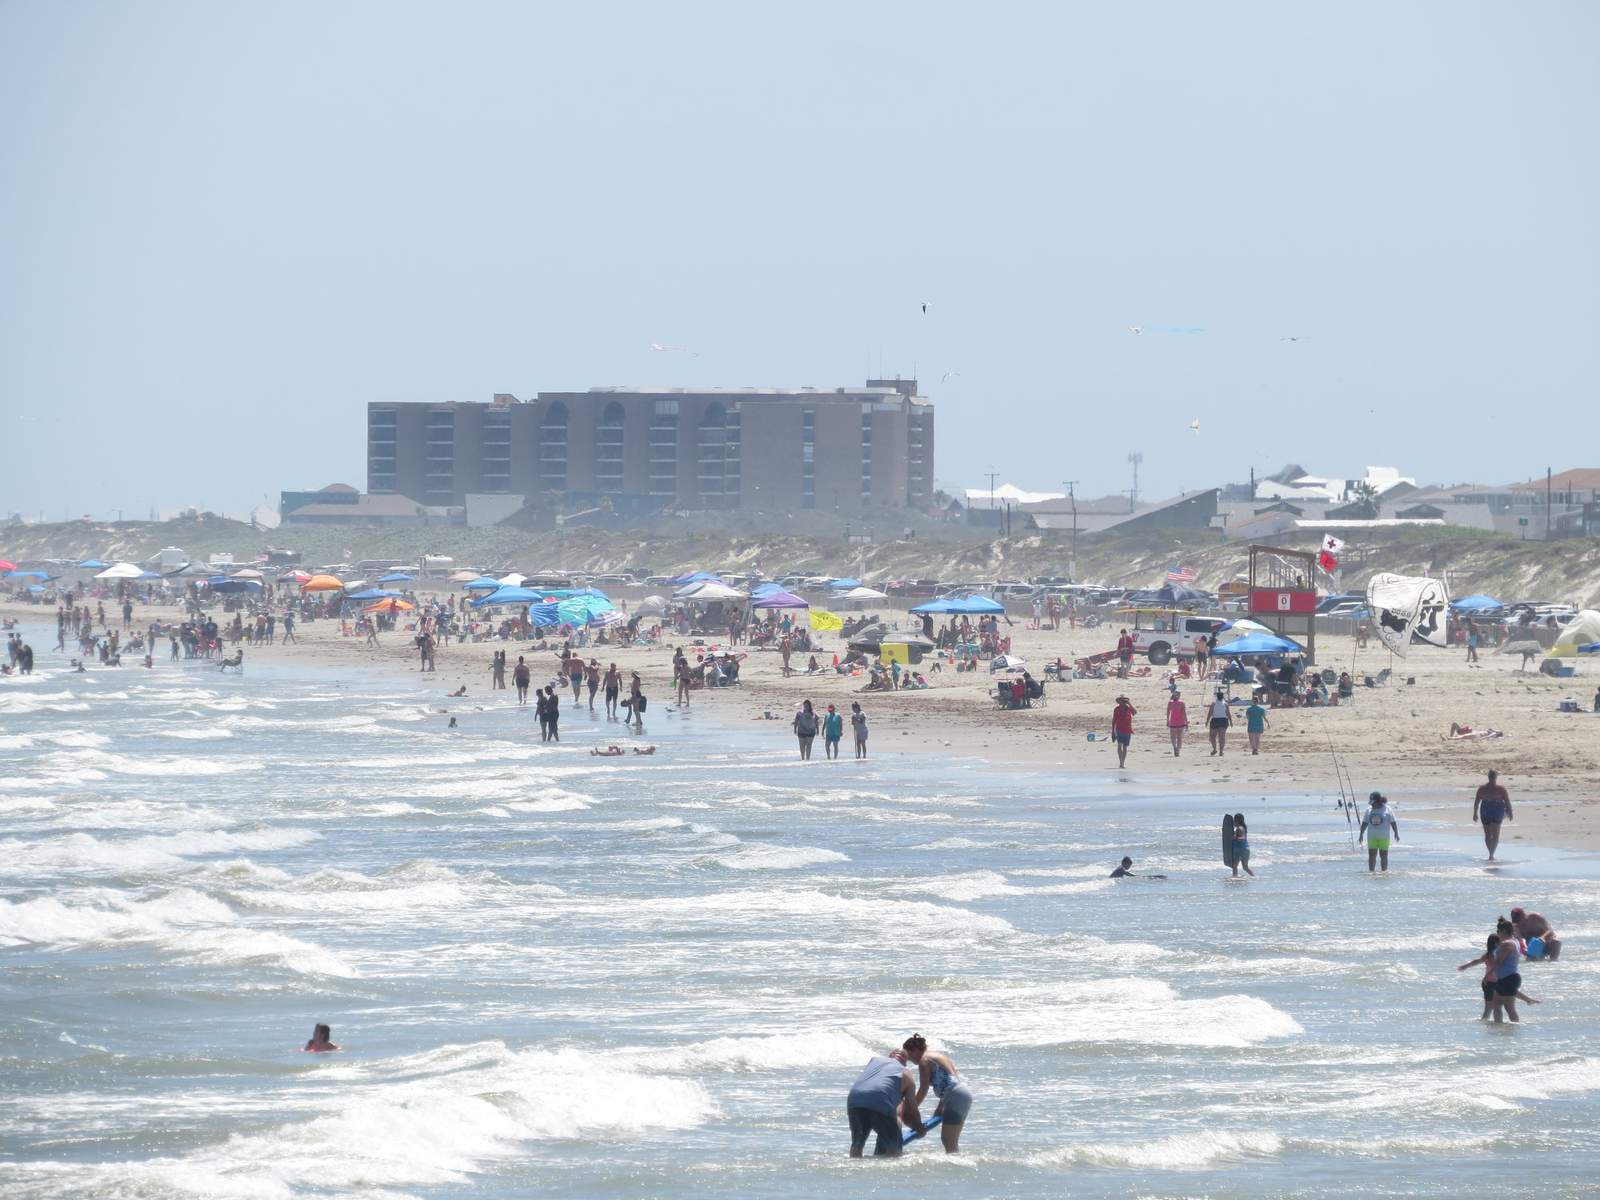 Going to the beach this weekend? Scope out the crowds early with these live videos